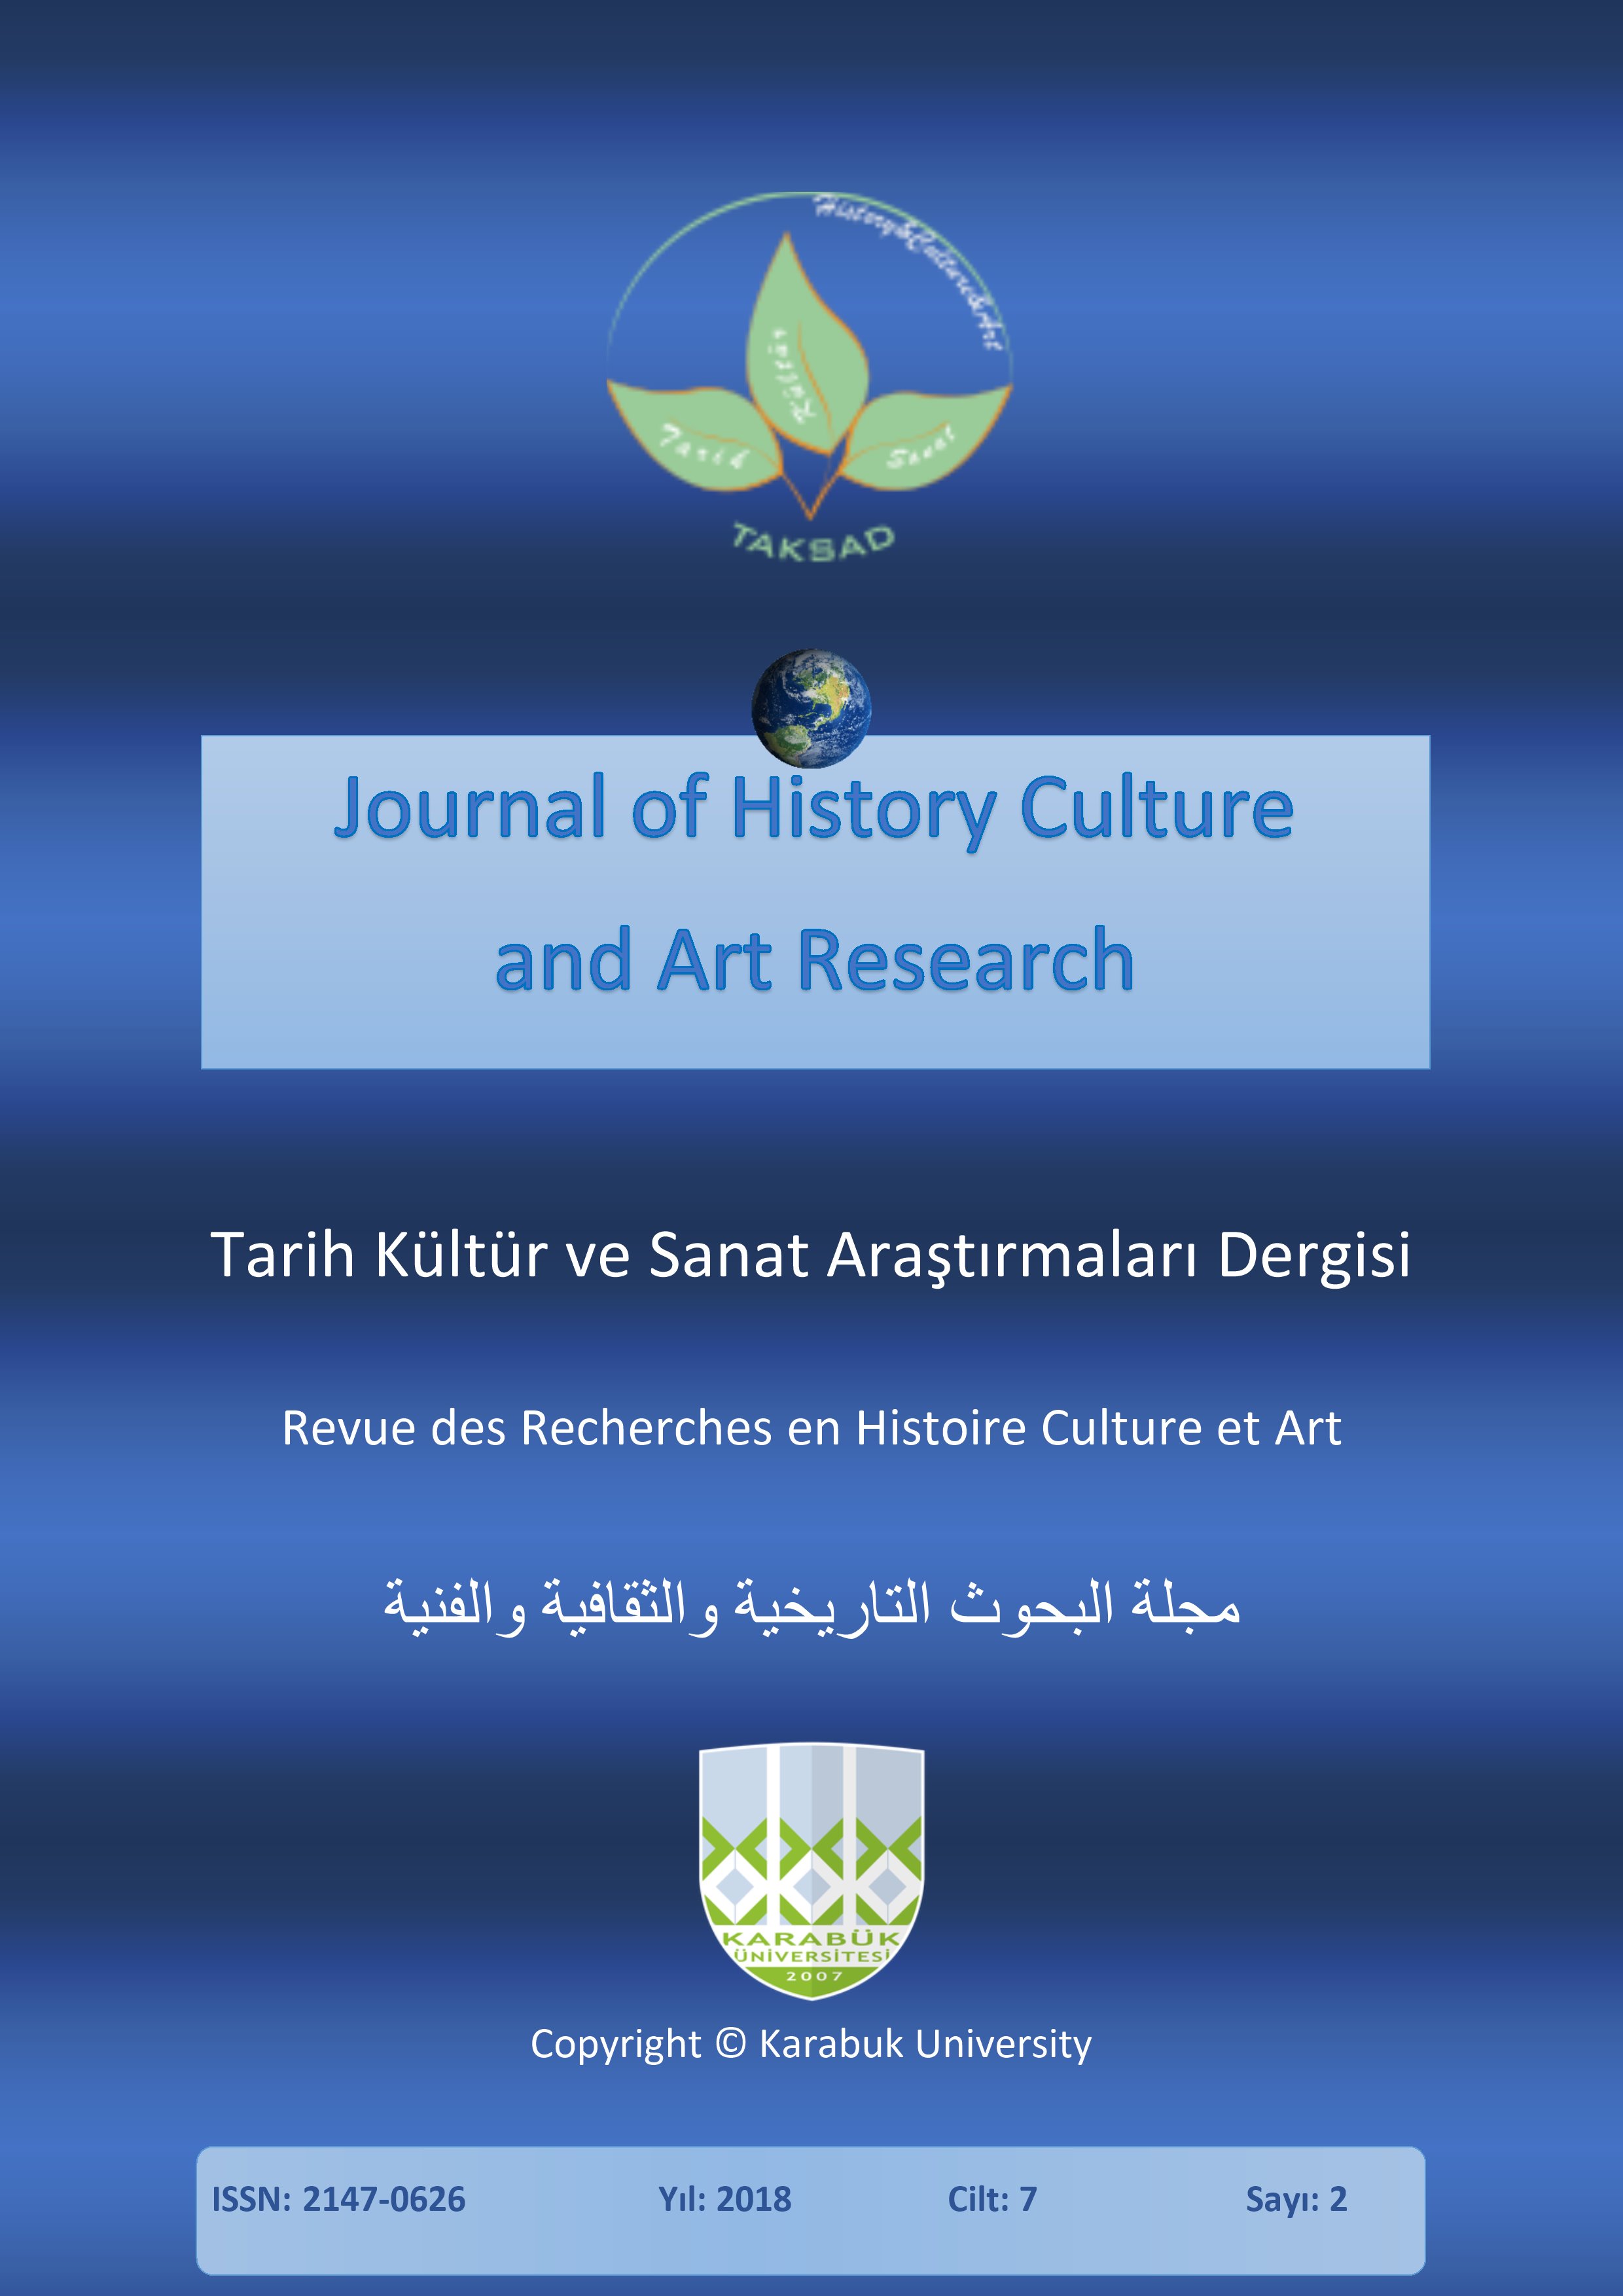 					View Vol. 7 No. 2 (2018): Journal of History Culture and Art Research 7 (2)
				